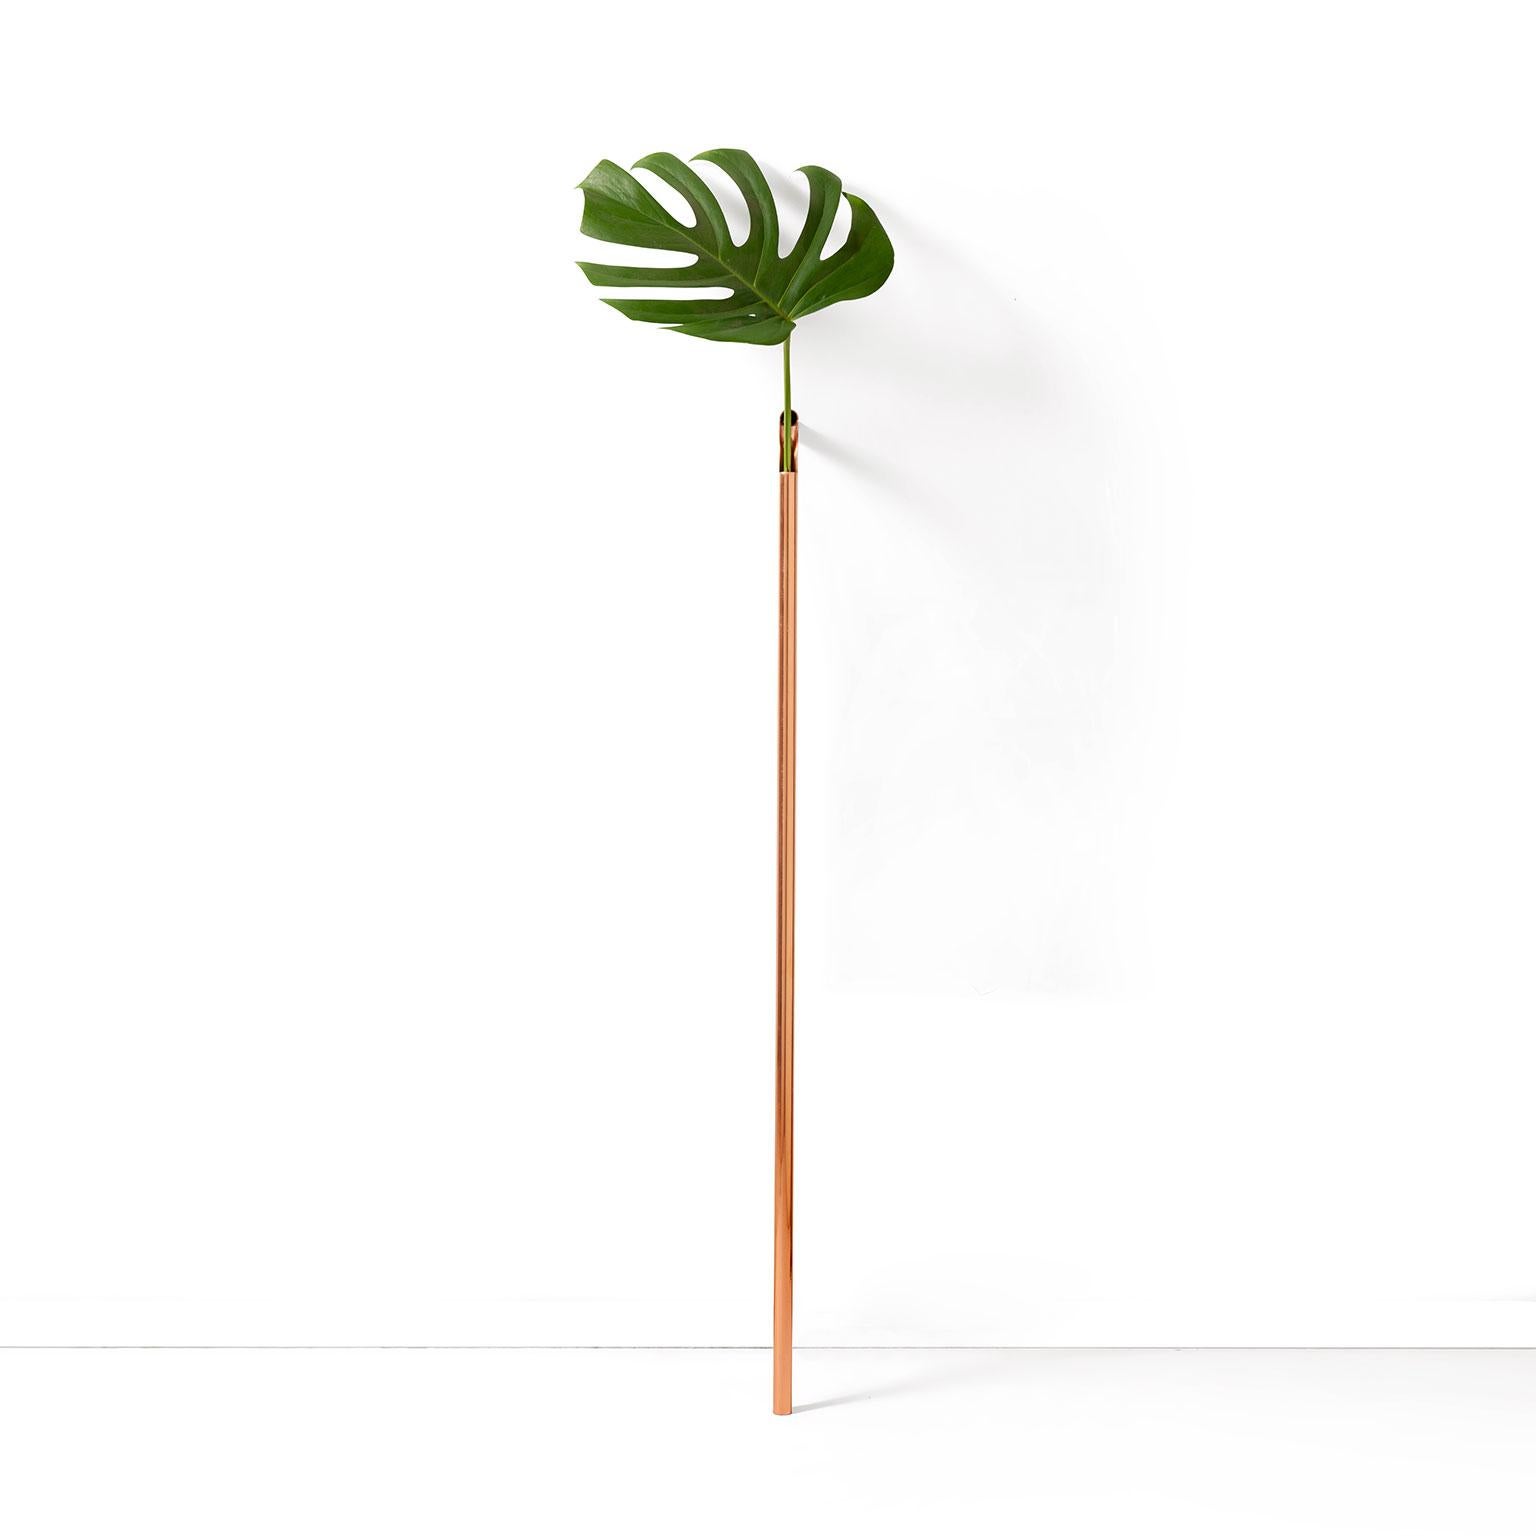 Solo vase proposes an unconventional and delicate way of bringing nature into the house. The slim metallic tube holds a single leaf or flower, mimetizing the continuation of the stems. The detail is made by a cut in the curve of the tube – inspired